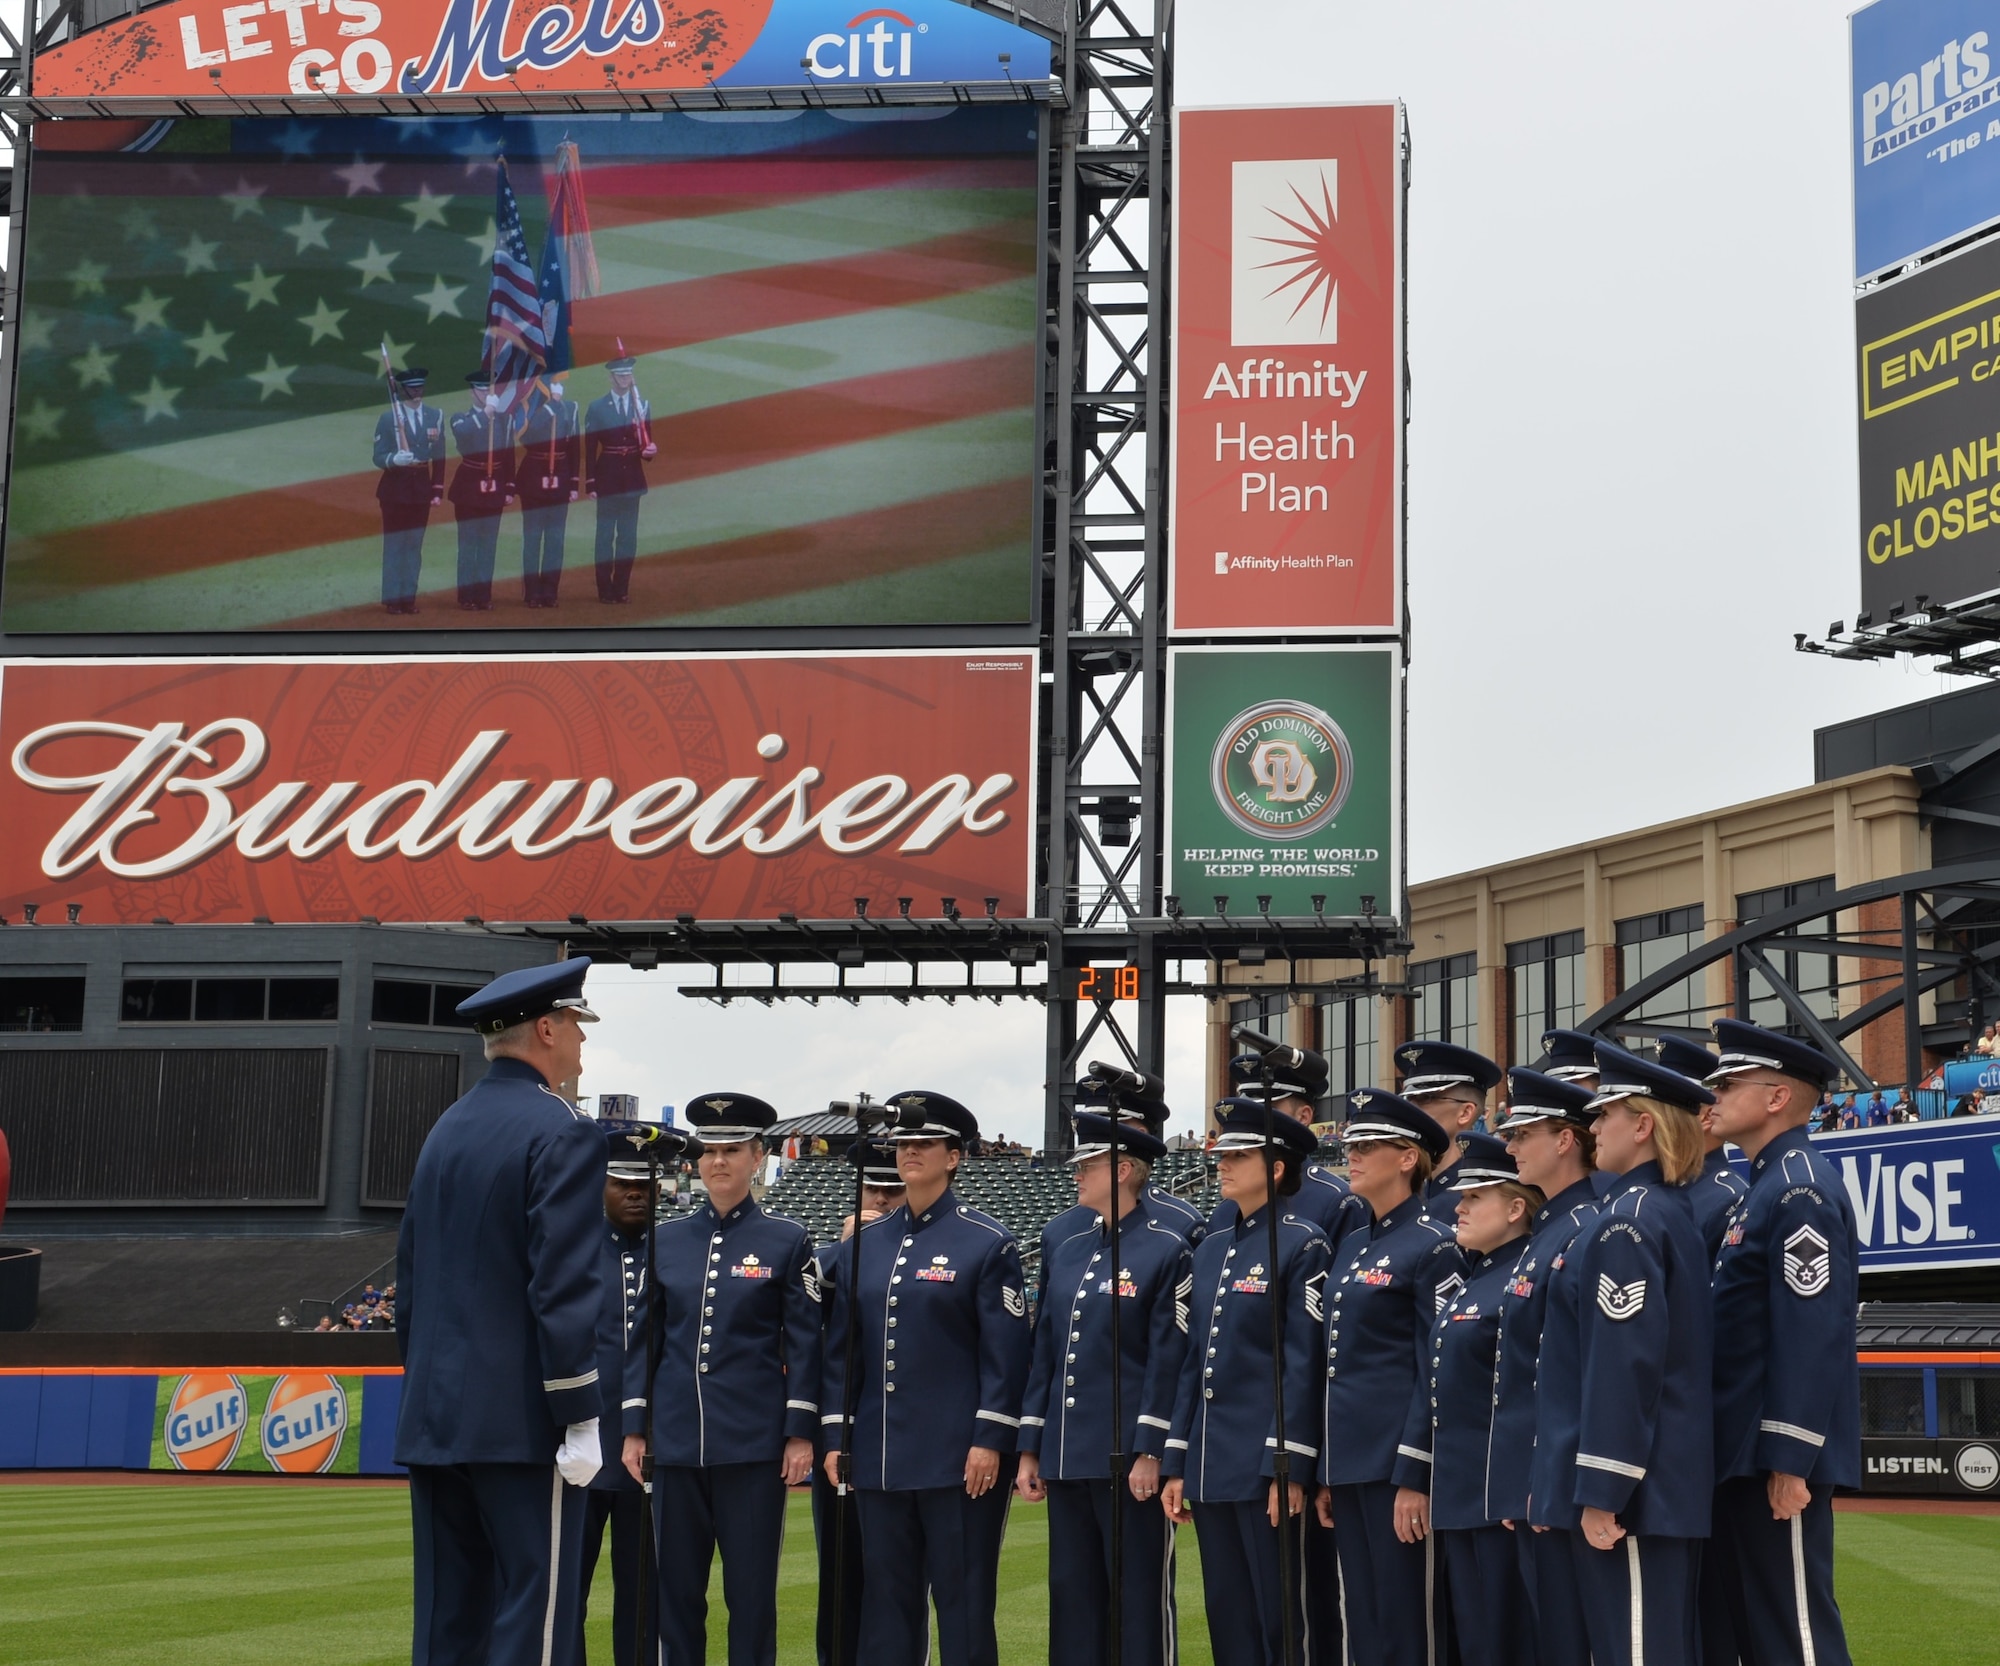 The United States Air Force Singing Sergeants and Honor Guard perform at New York City's Citi Field on July 2, 2015 before the Mets’ game. This performance was part of a larger five-day tour in New York City to represent the Air Force on the nation's birthday (U.S. Air Force photo/1Lt. Esther Willett).